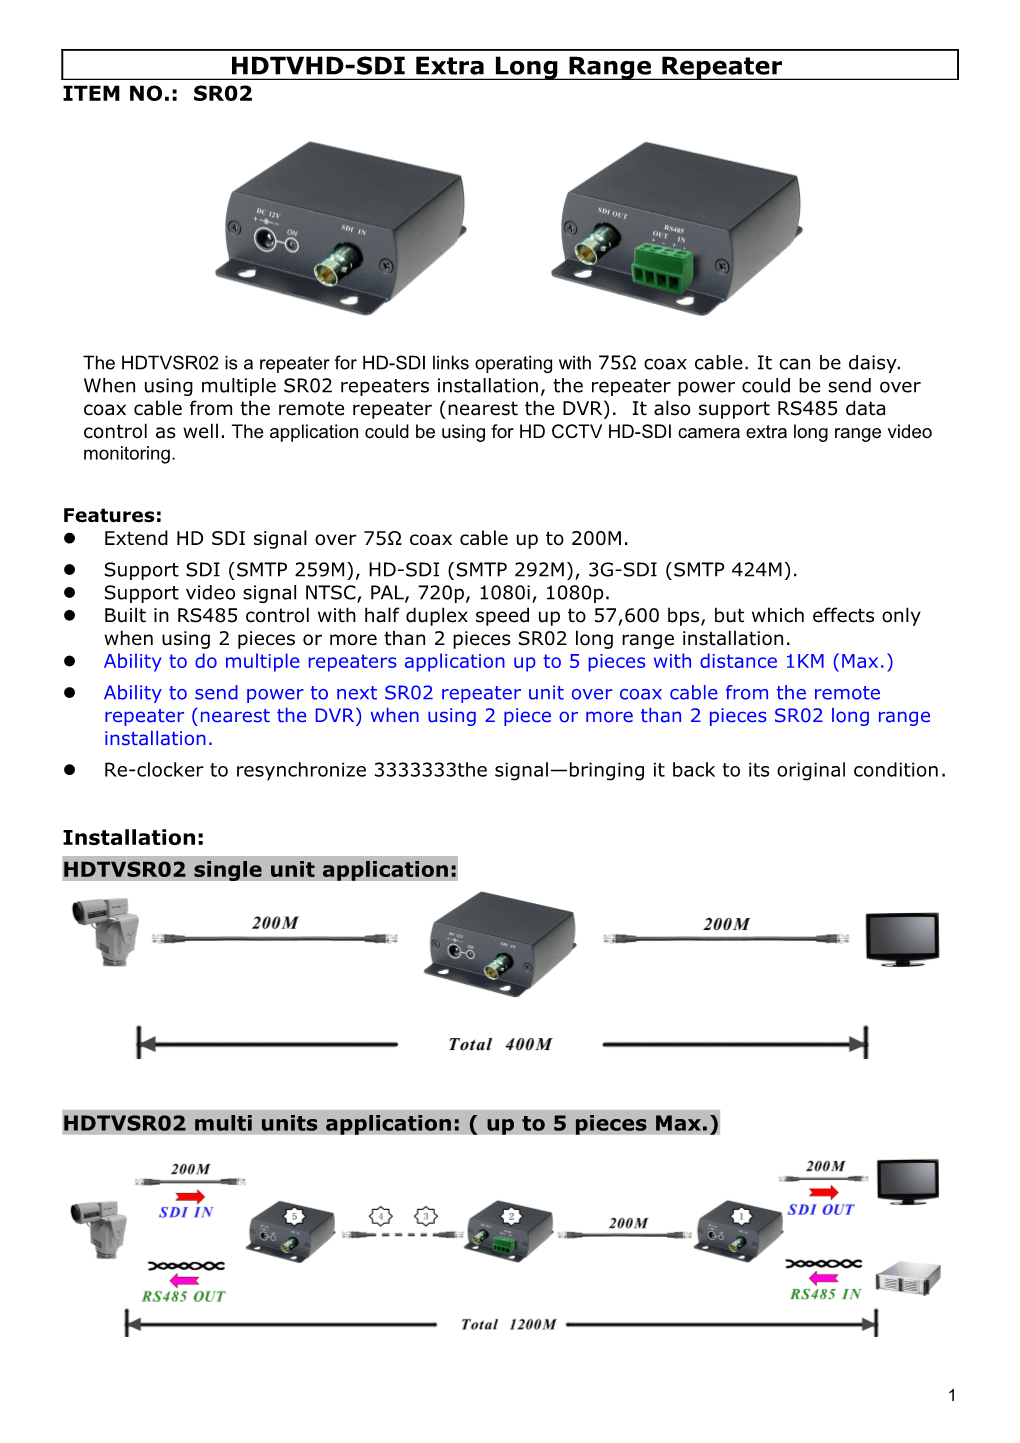 Twisted Pair Transmision System s1